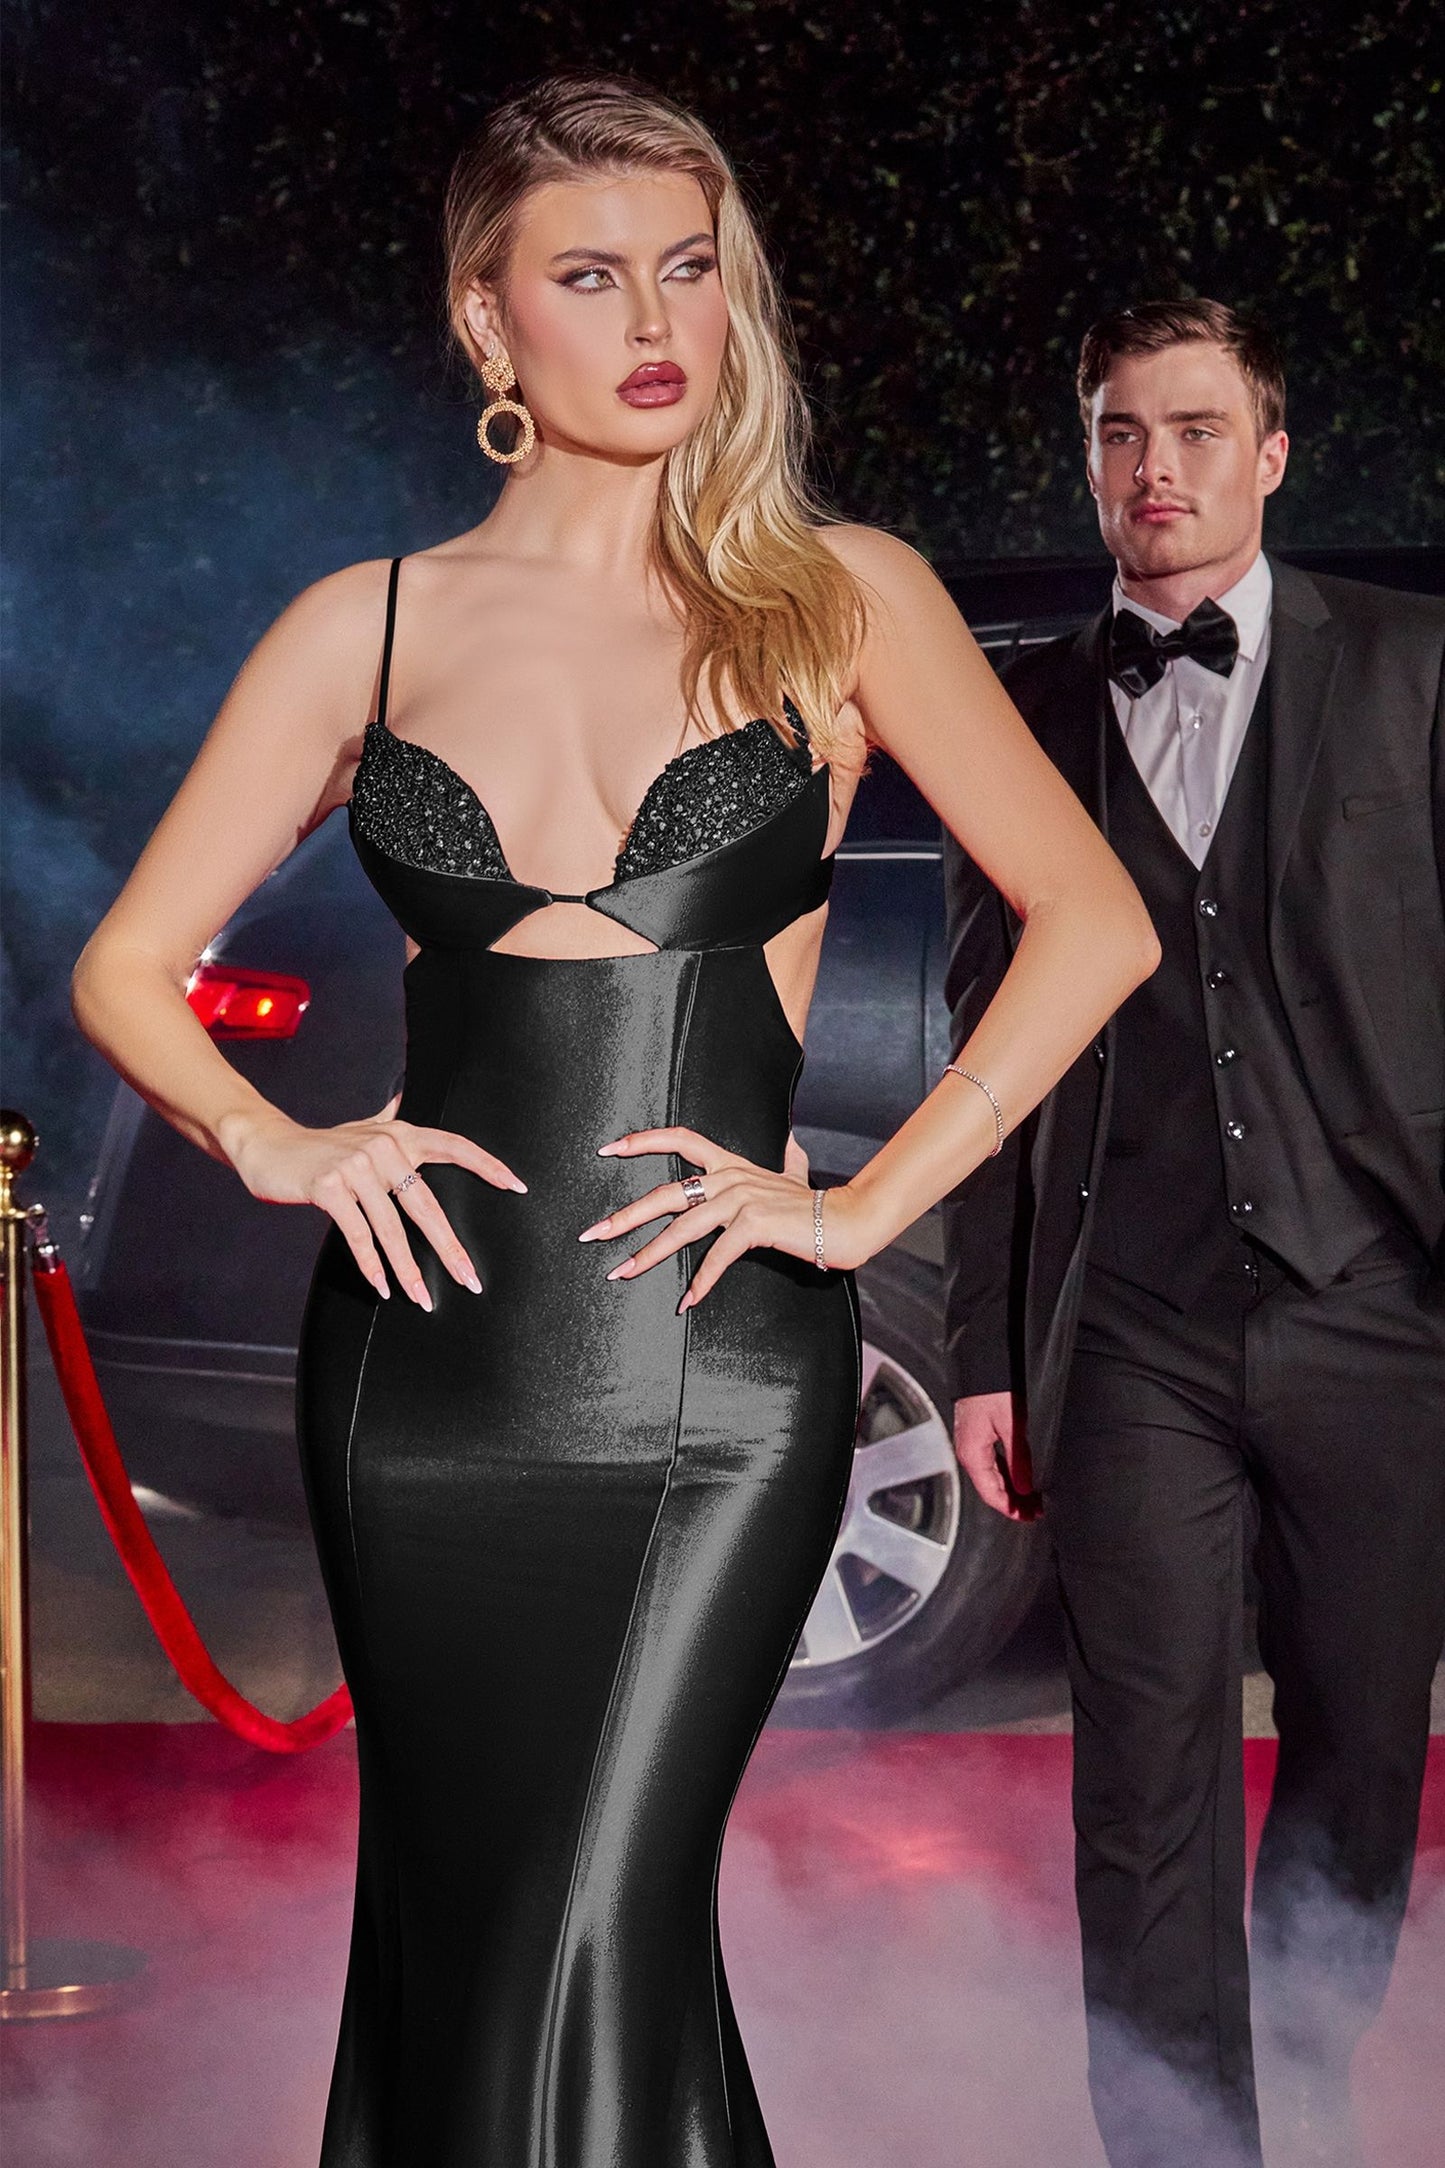 black Satin sexy gown dress with embellished bodice for prom night 